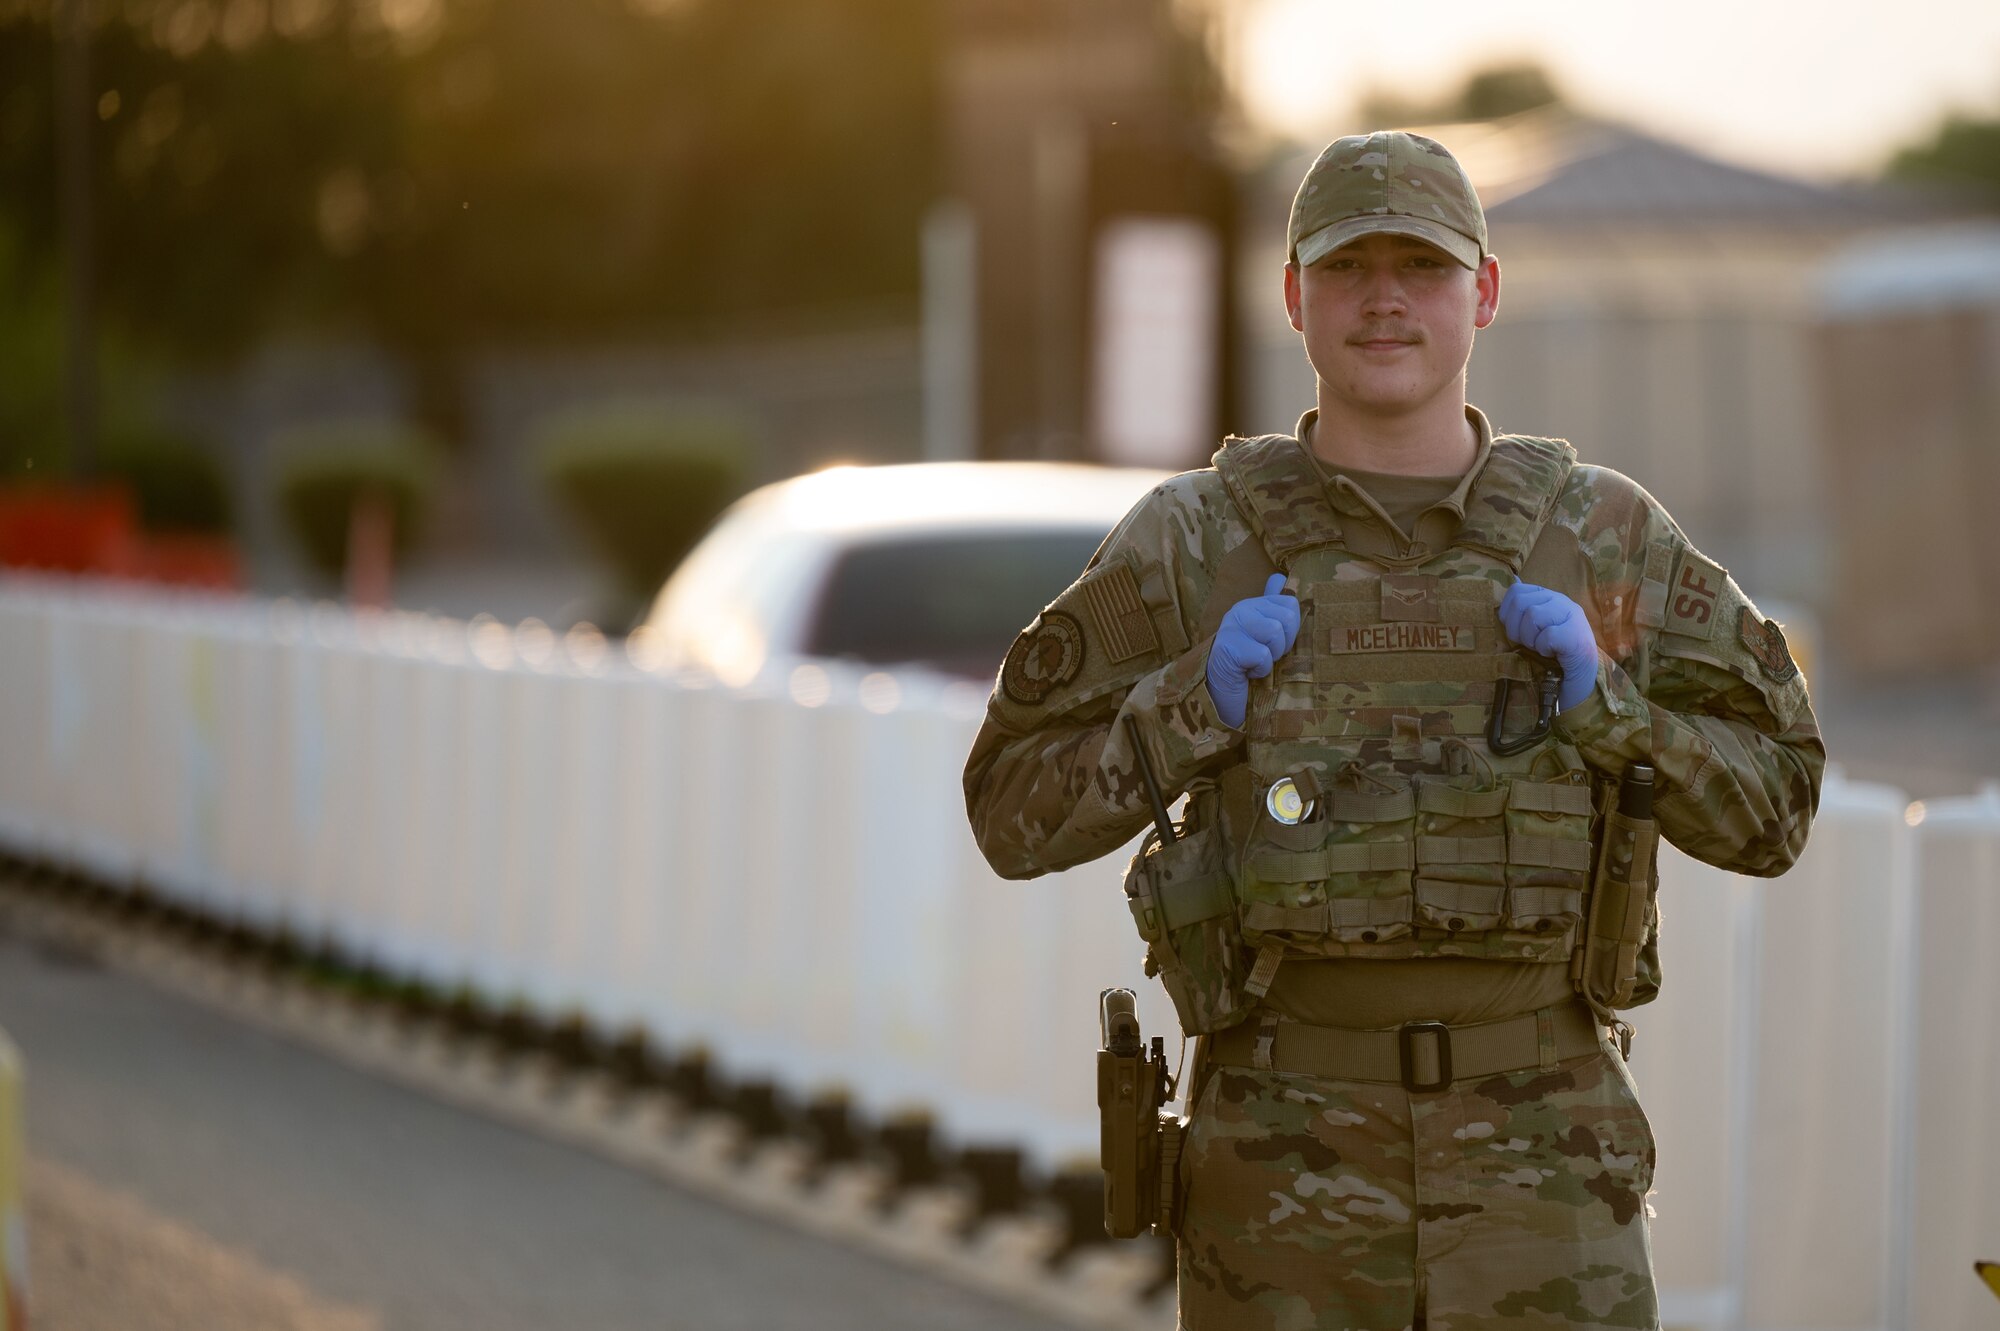 Environmental portrait featuring Security Forces airman.